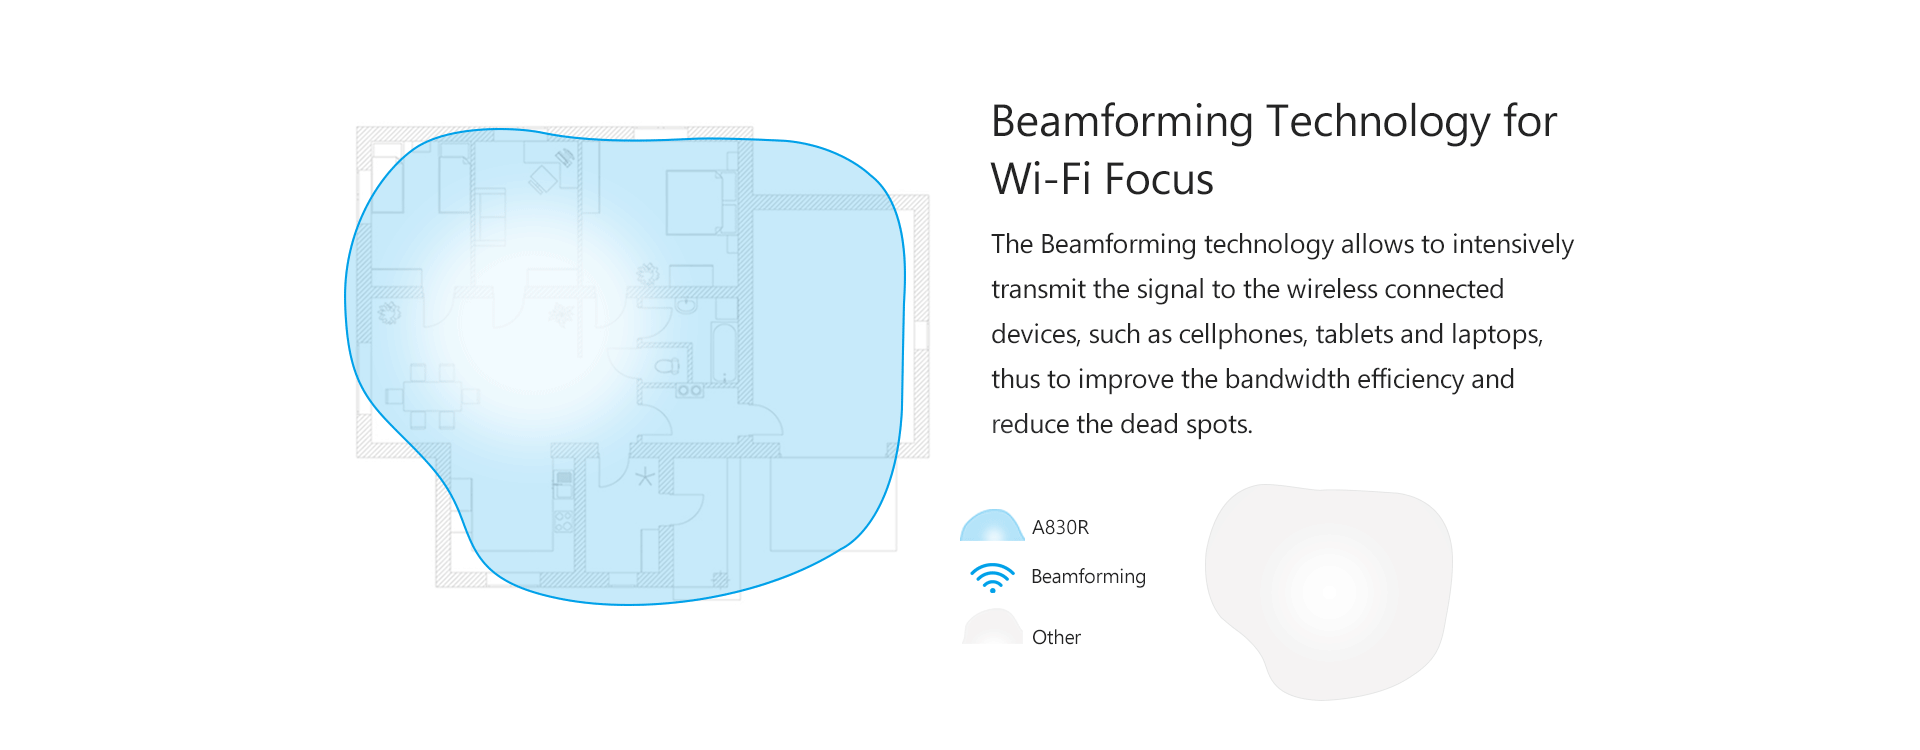 Beamforming technology for WI-FI focus 